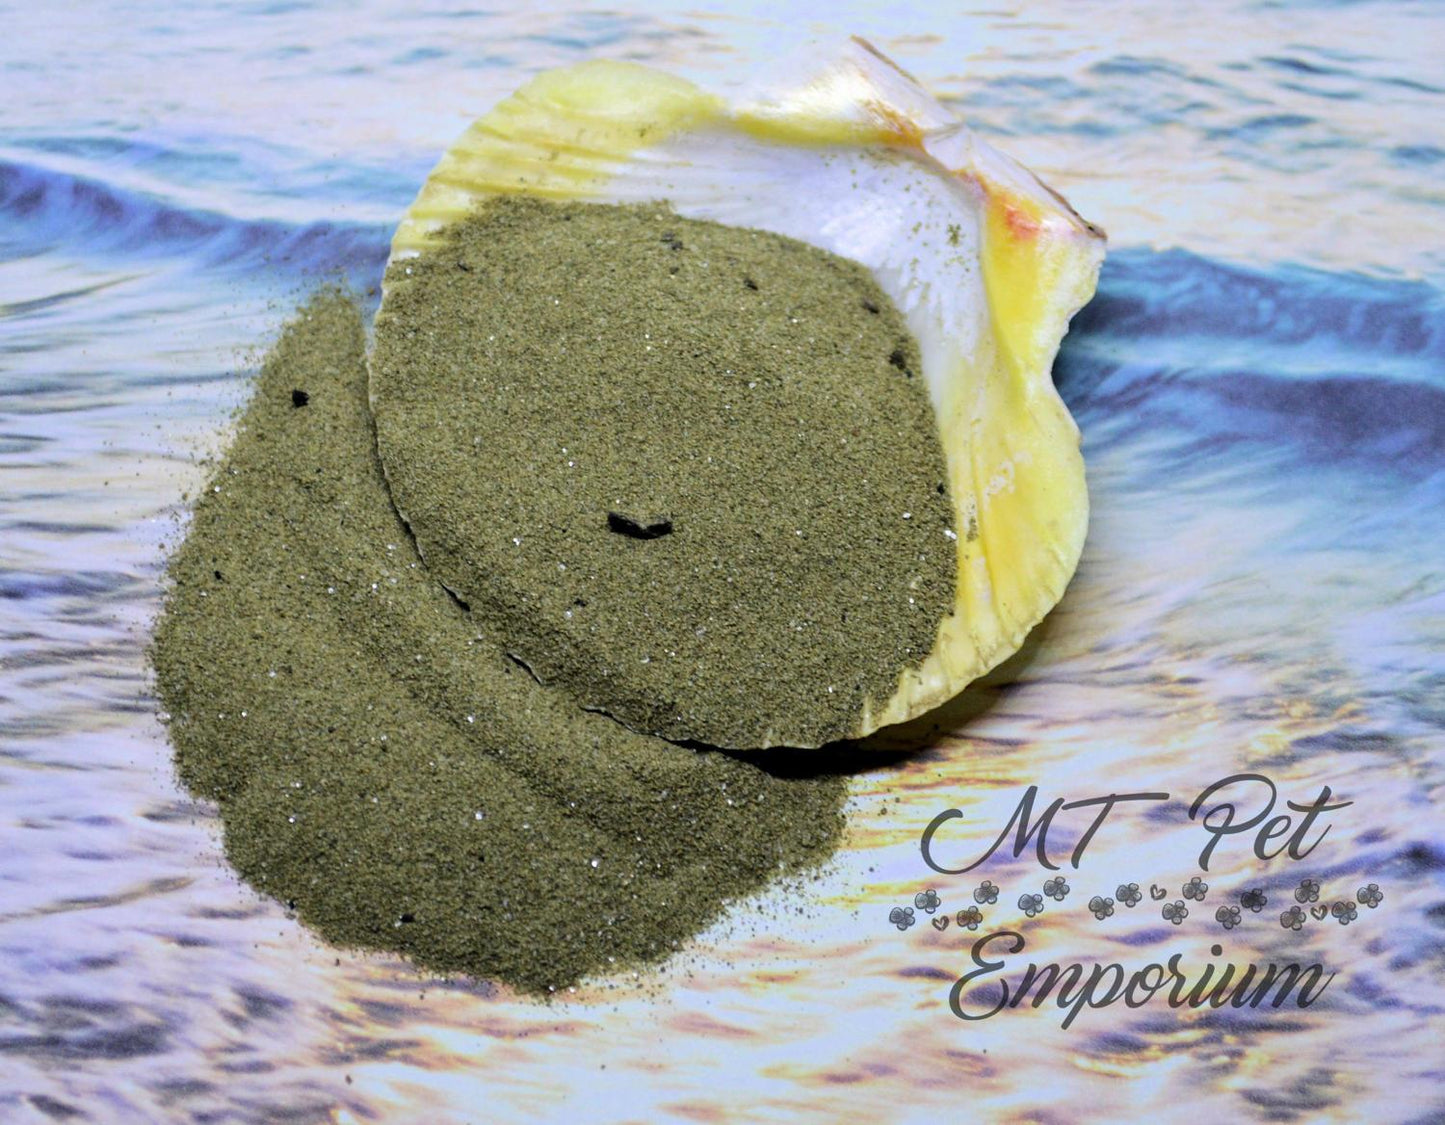 Greensand 1.5"x2" - FREE for orders $10.00 and over. (After all discounts and before shipping, ONE FREEBIE PER SHIPMENT.)